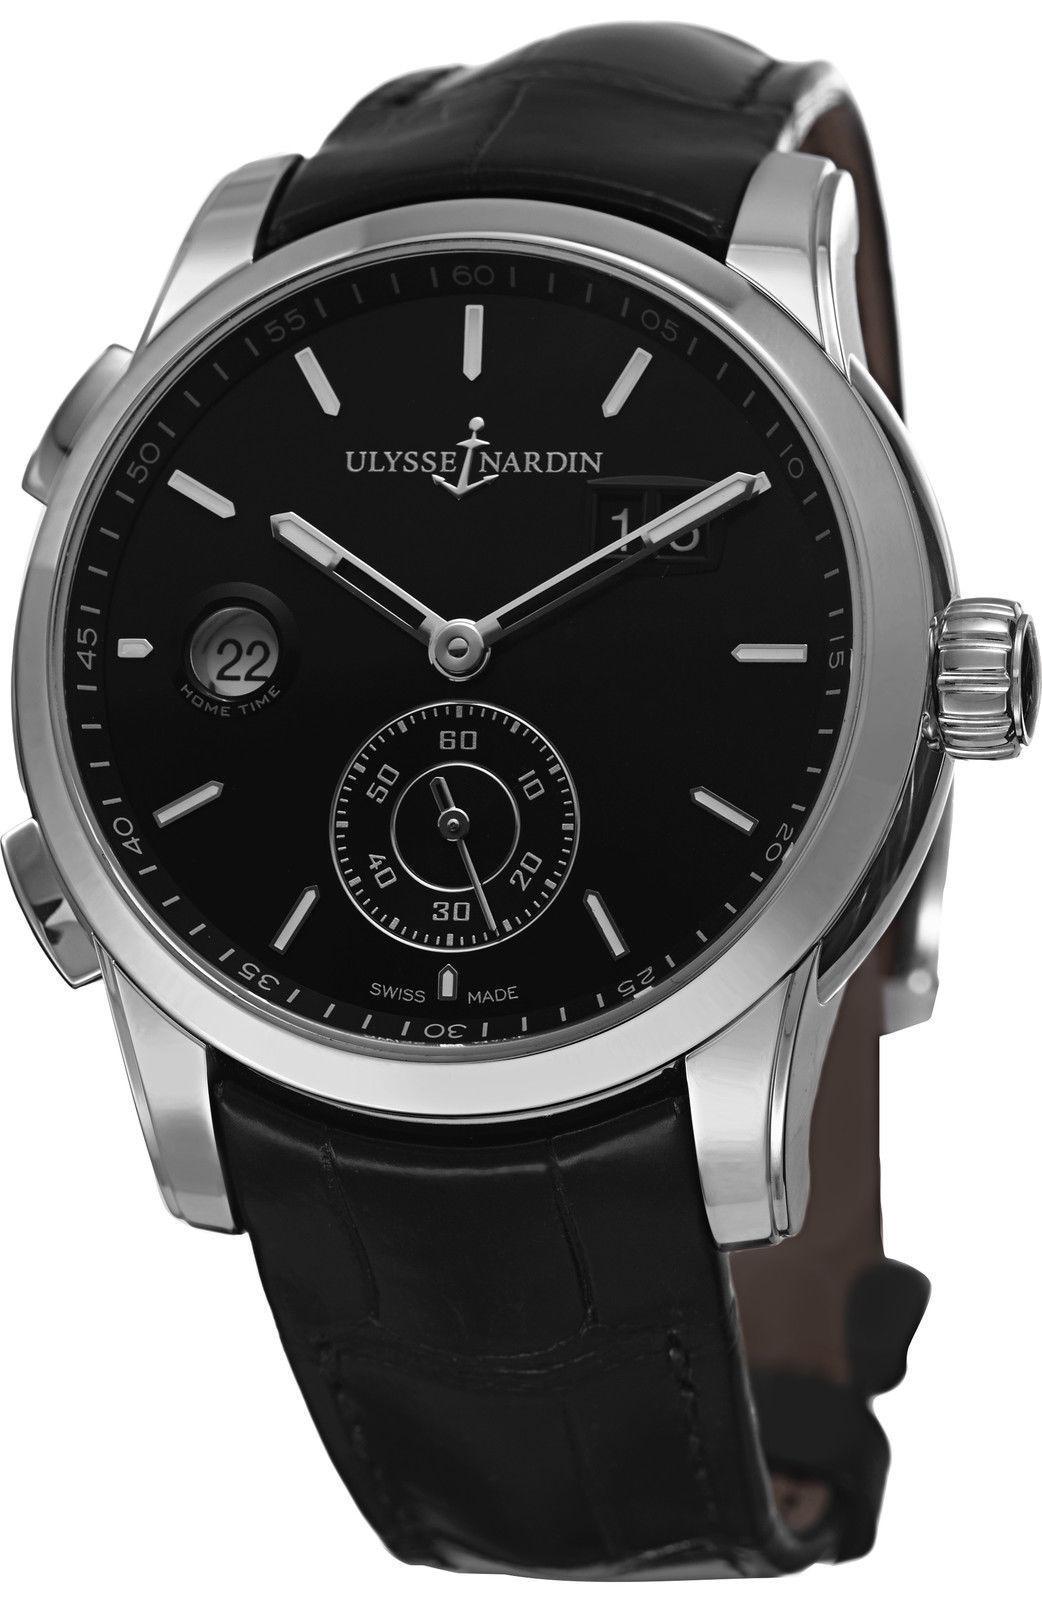 Ulysse Nardin Dual Time Manufacture Stainless Steel, Leather Strap Men's Watch For Sale 3